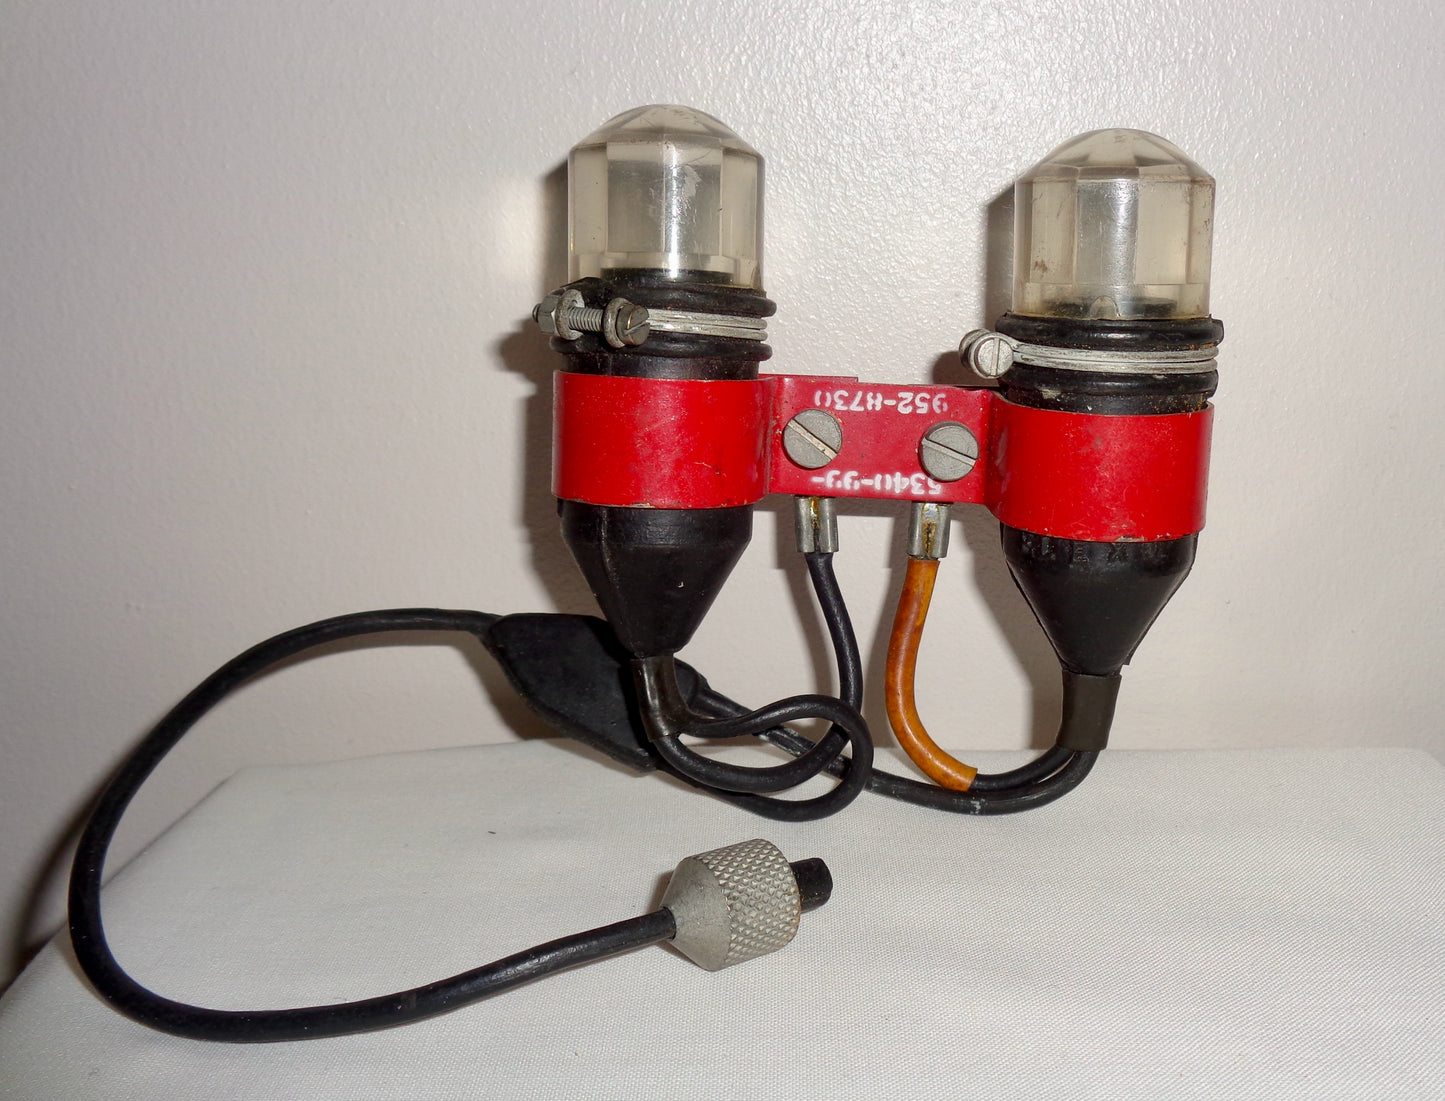 1950s Jet Aircraft Twin Navigation Lamp NATO Number 5340-99-952-8730